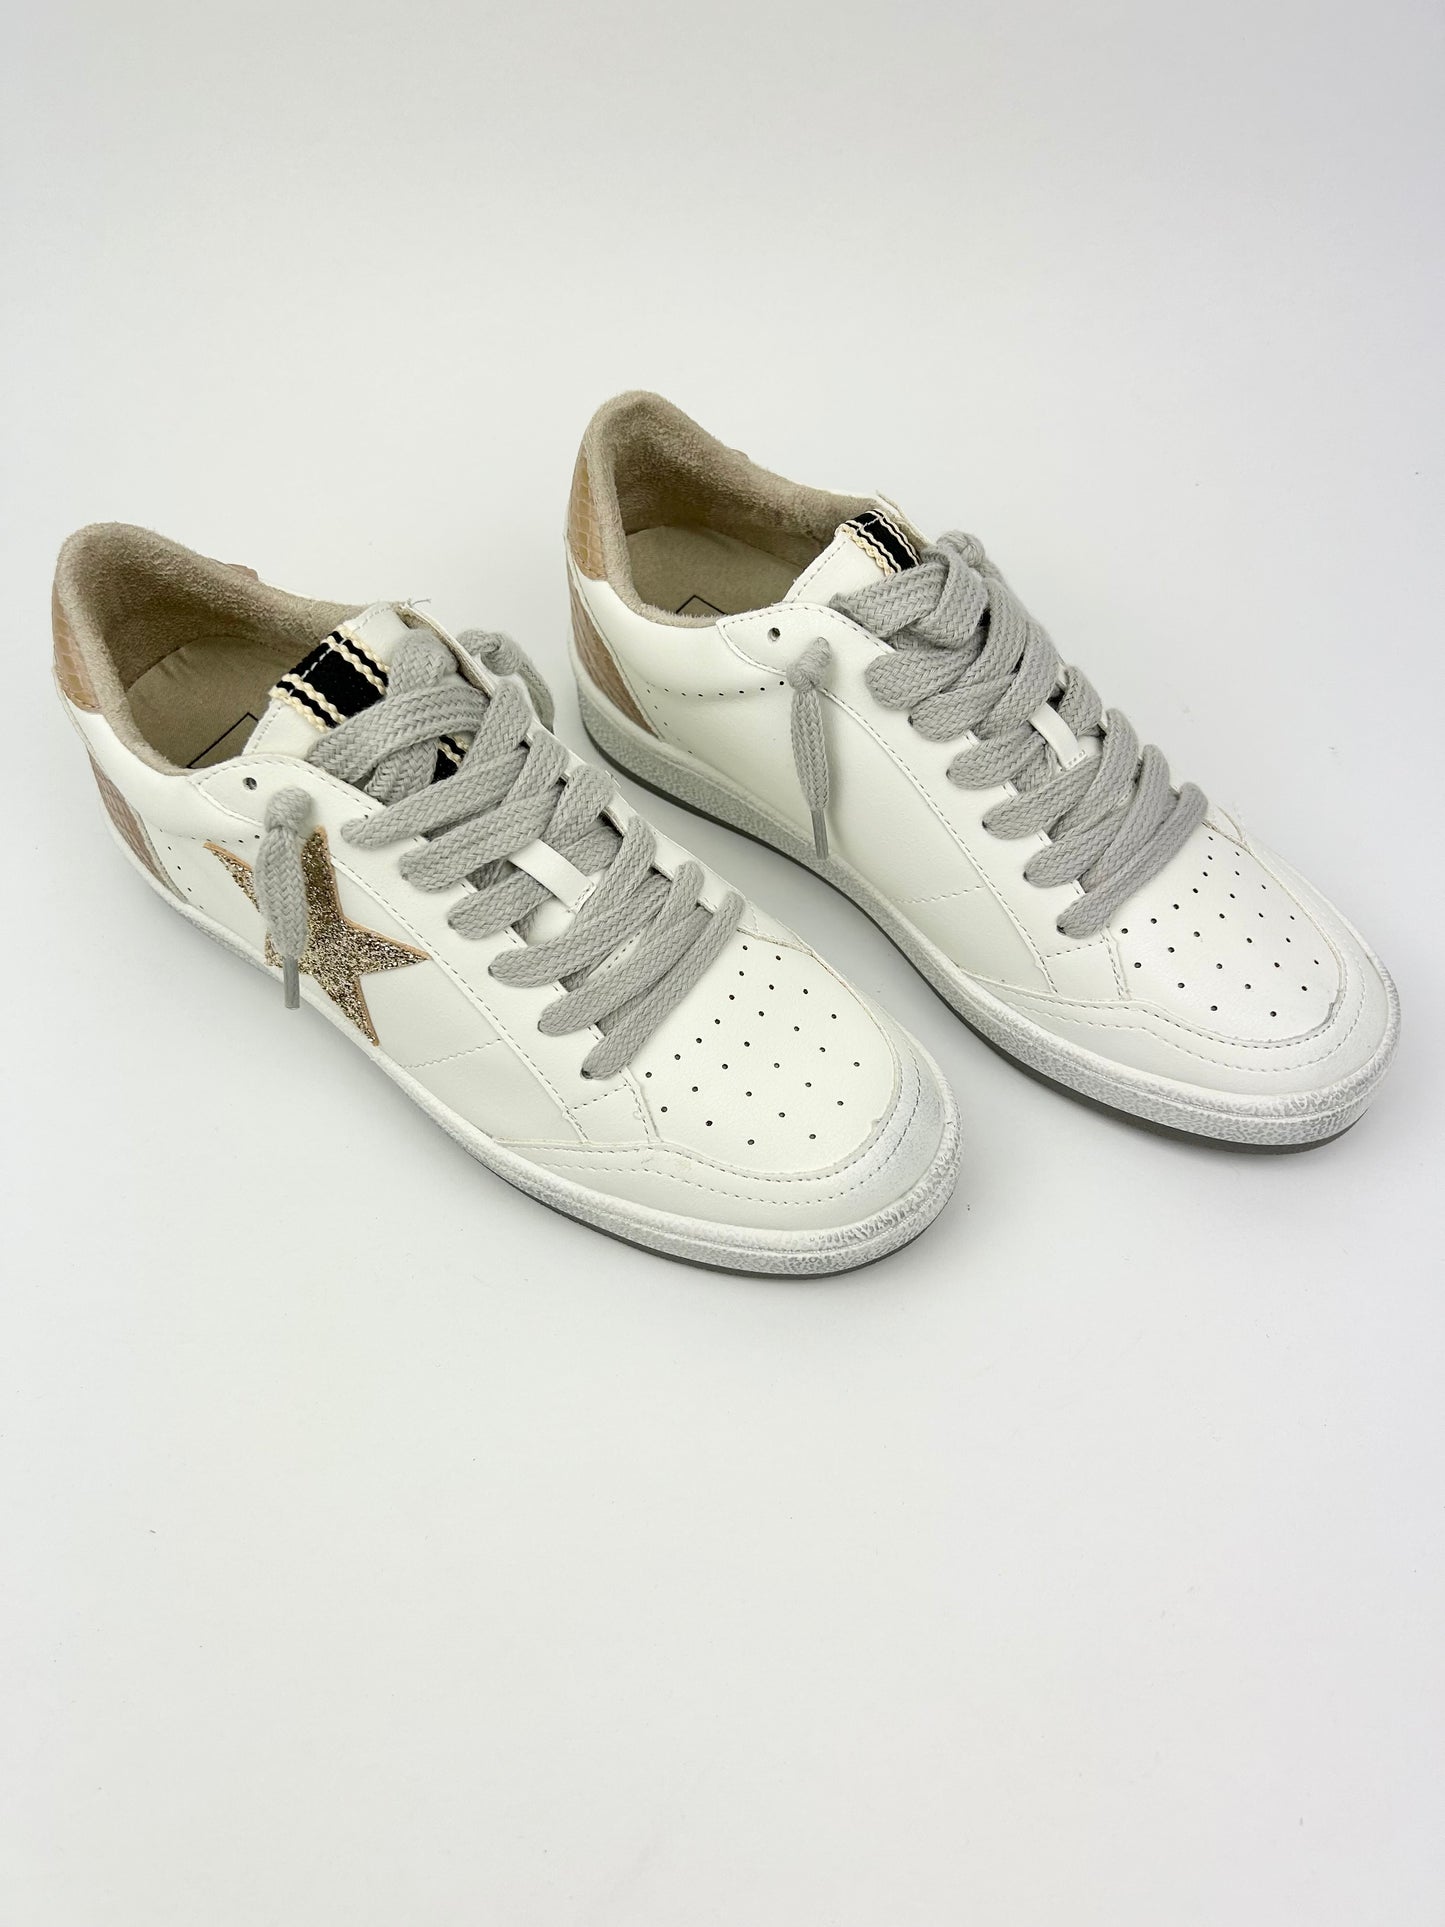 Paz Taupe Snake Sneaker Shoes in  at Wrapsody